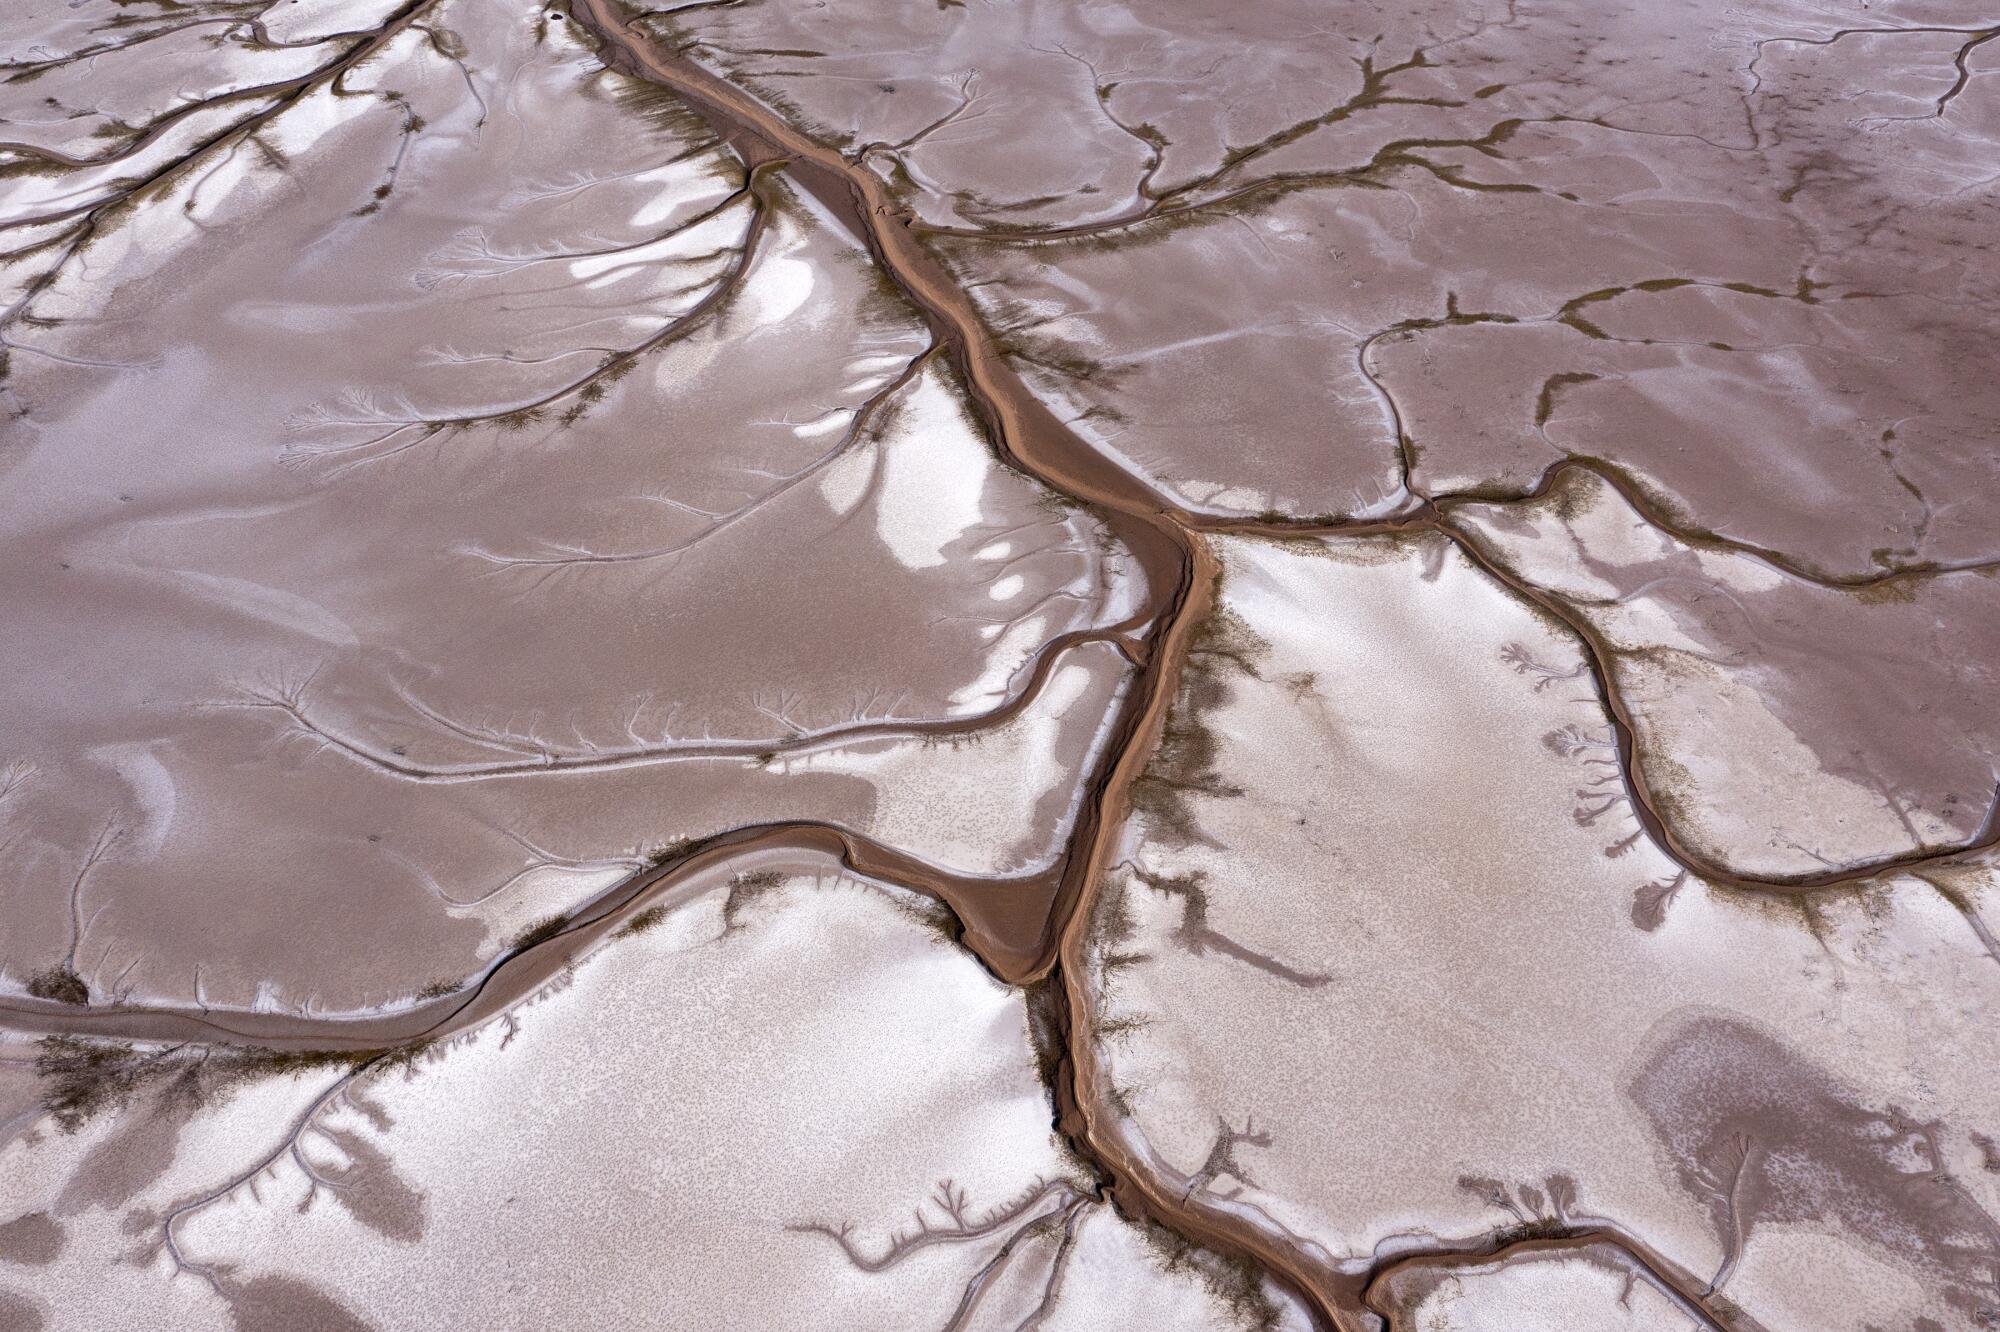 An aerial view of dried mud in the Colorado River Delta.